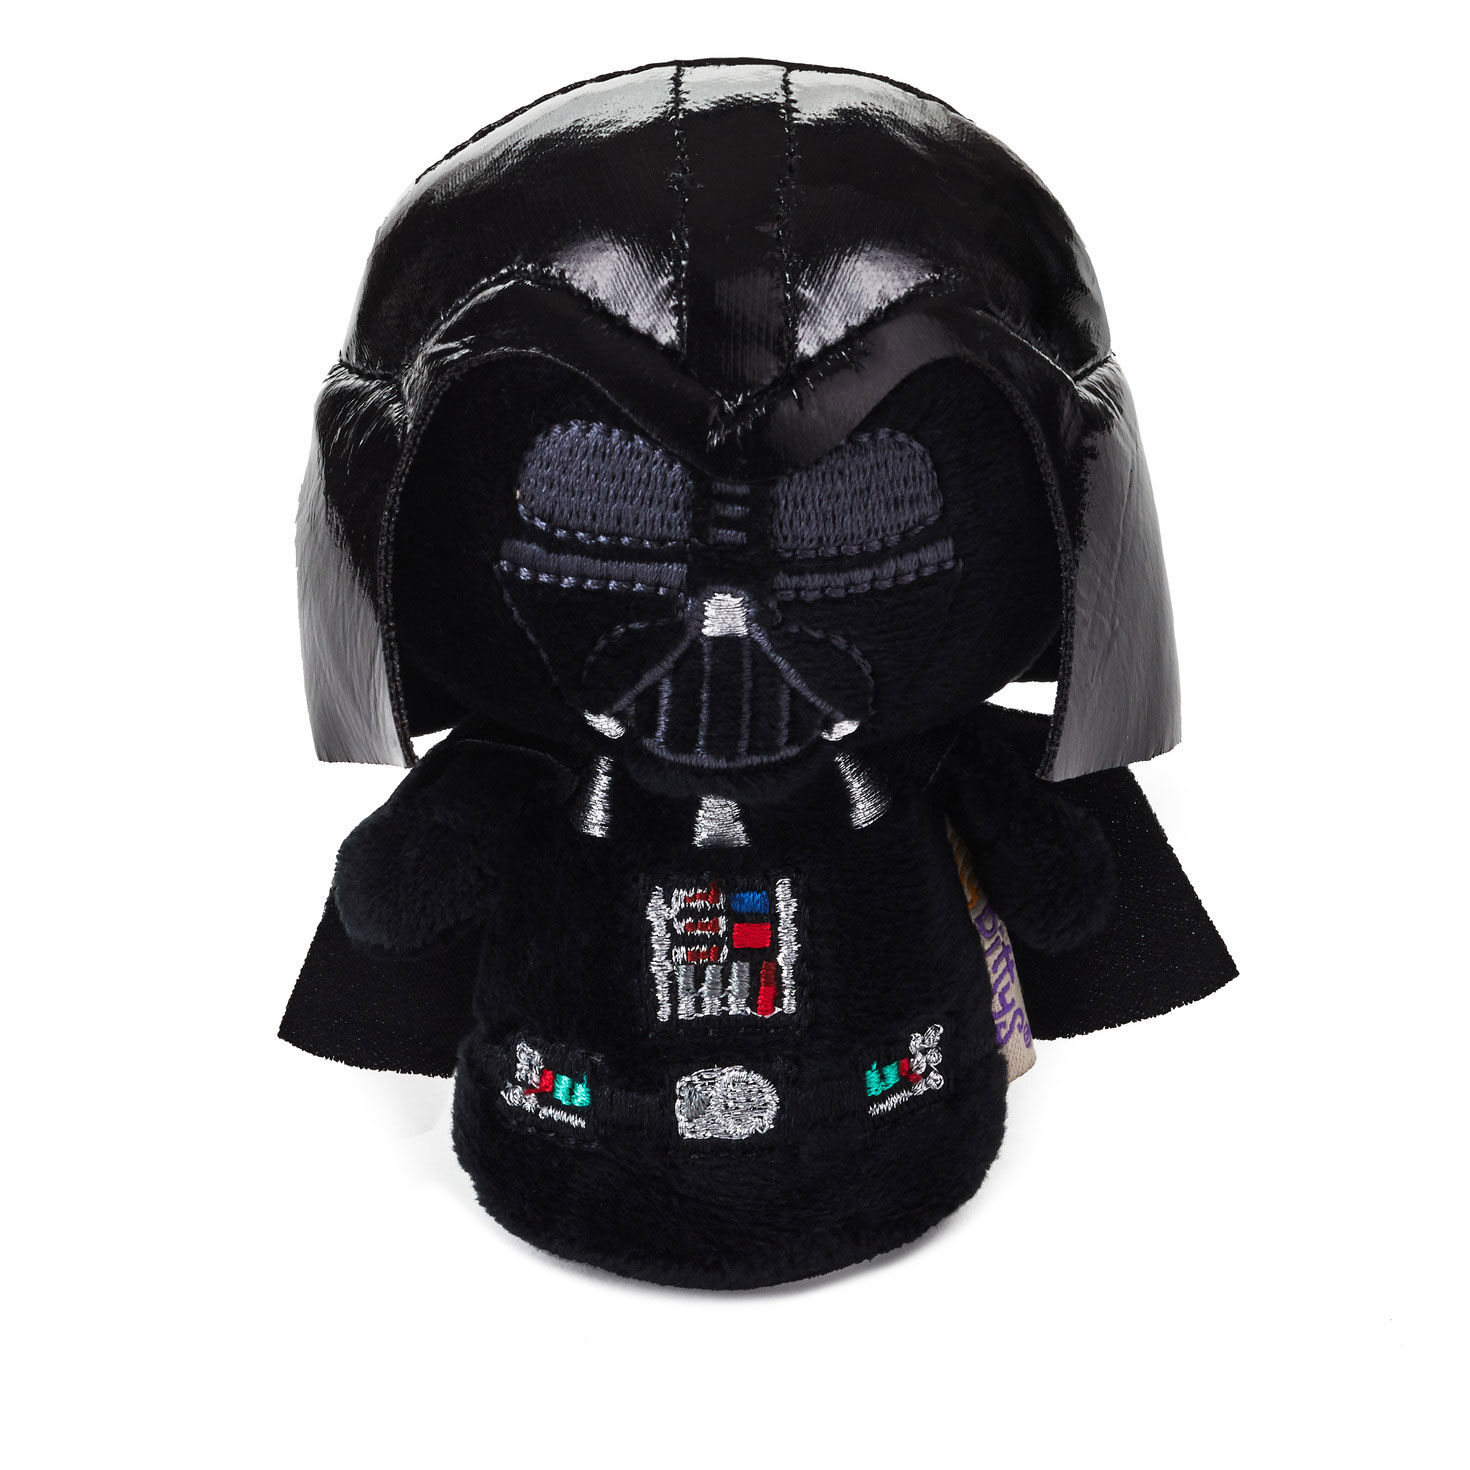 itty bittys® Star Wars™ Darth Vader™ Plush With Sound for only USD 14.99 | Hallmark